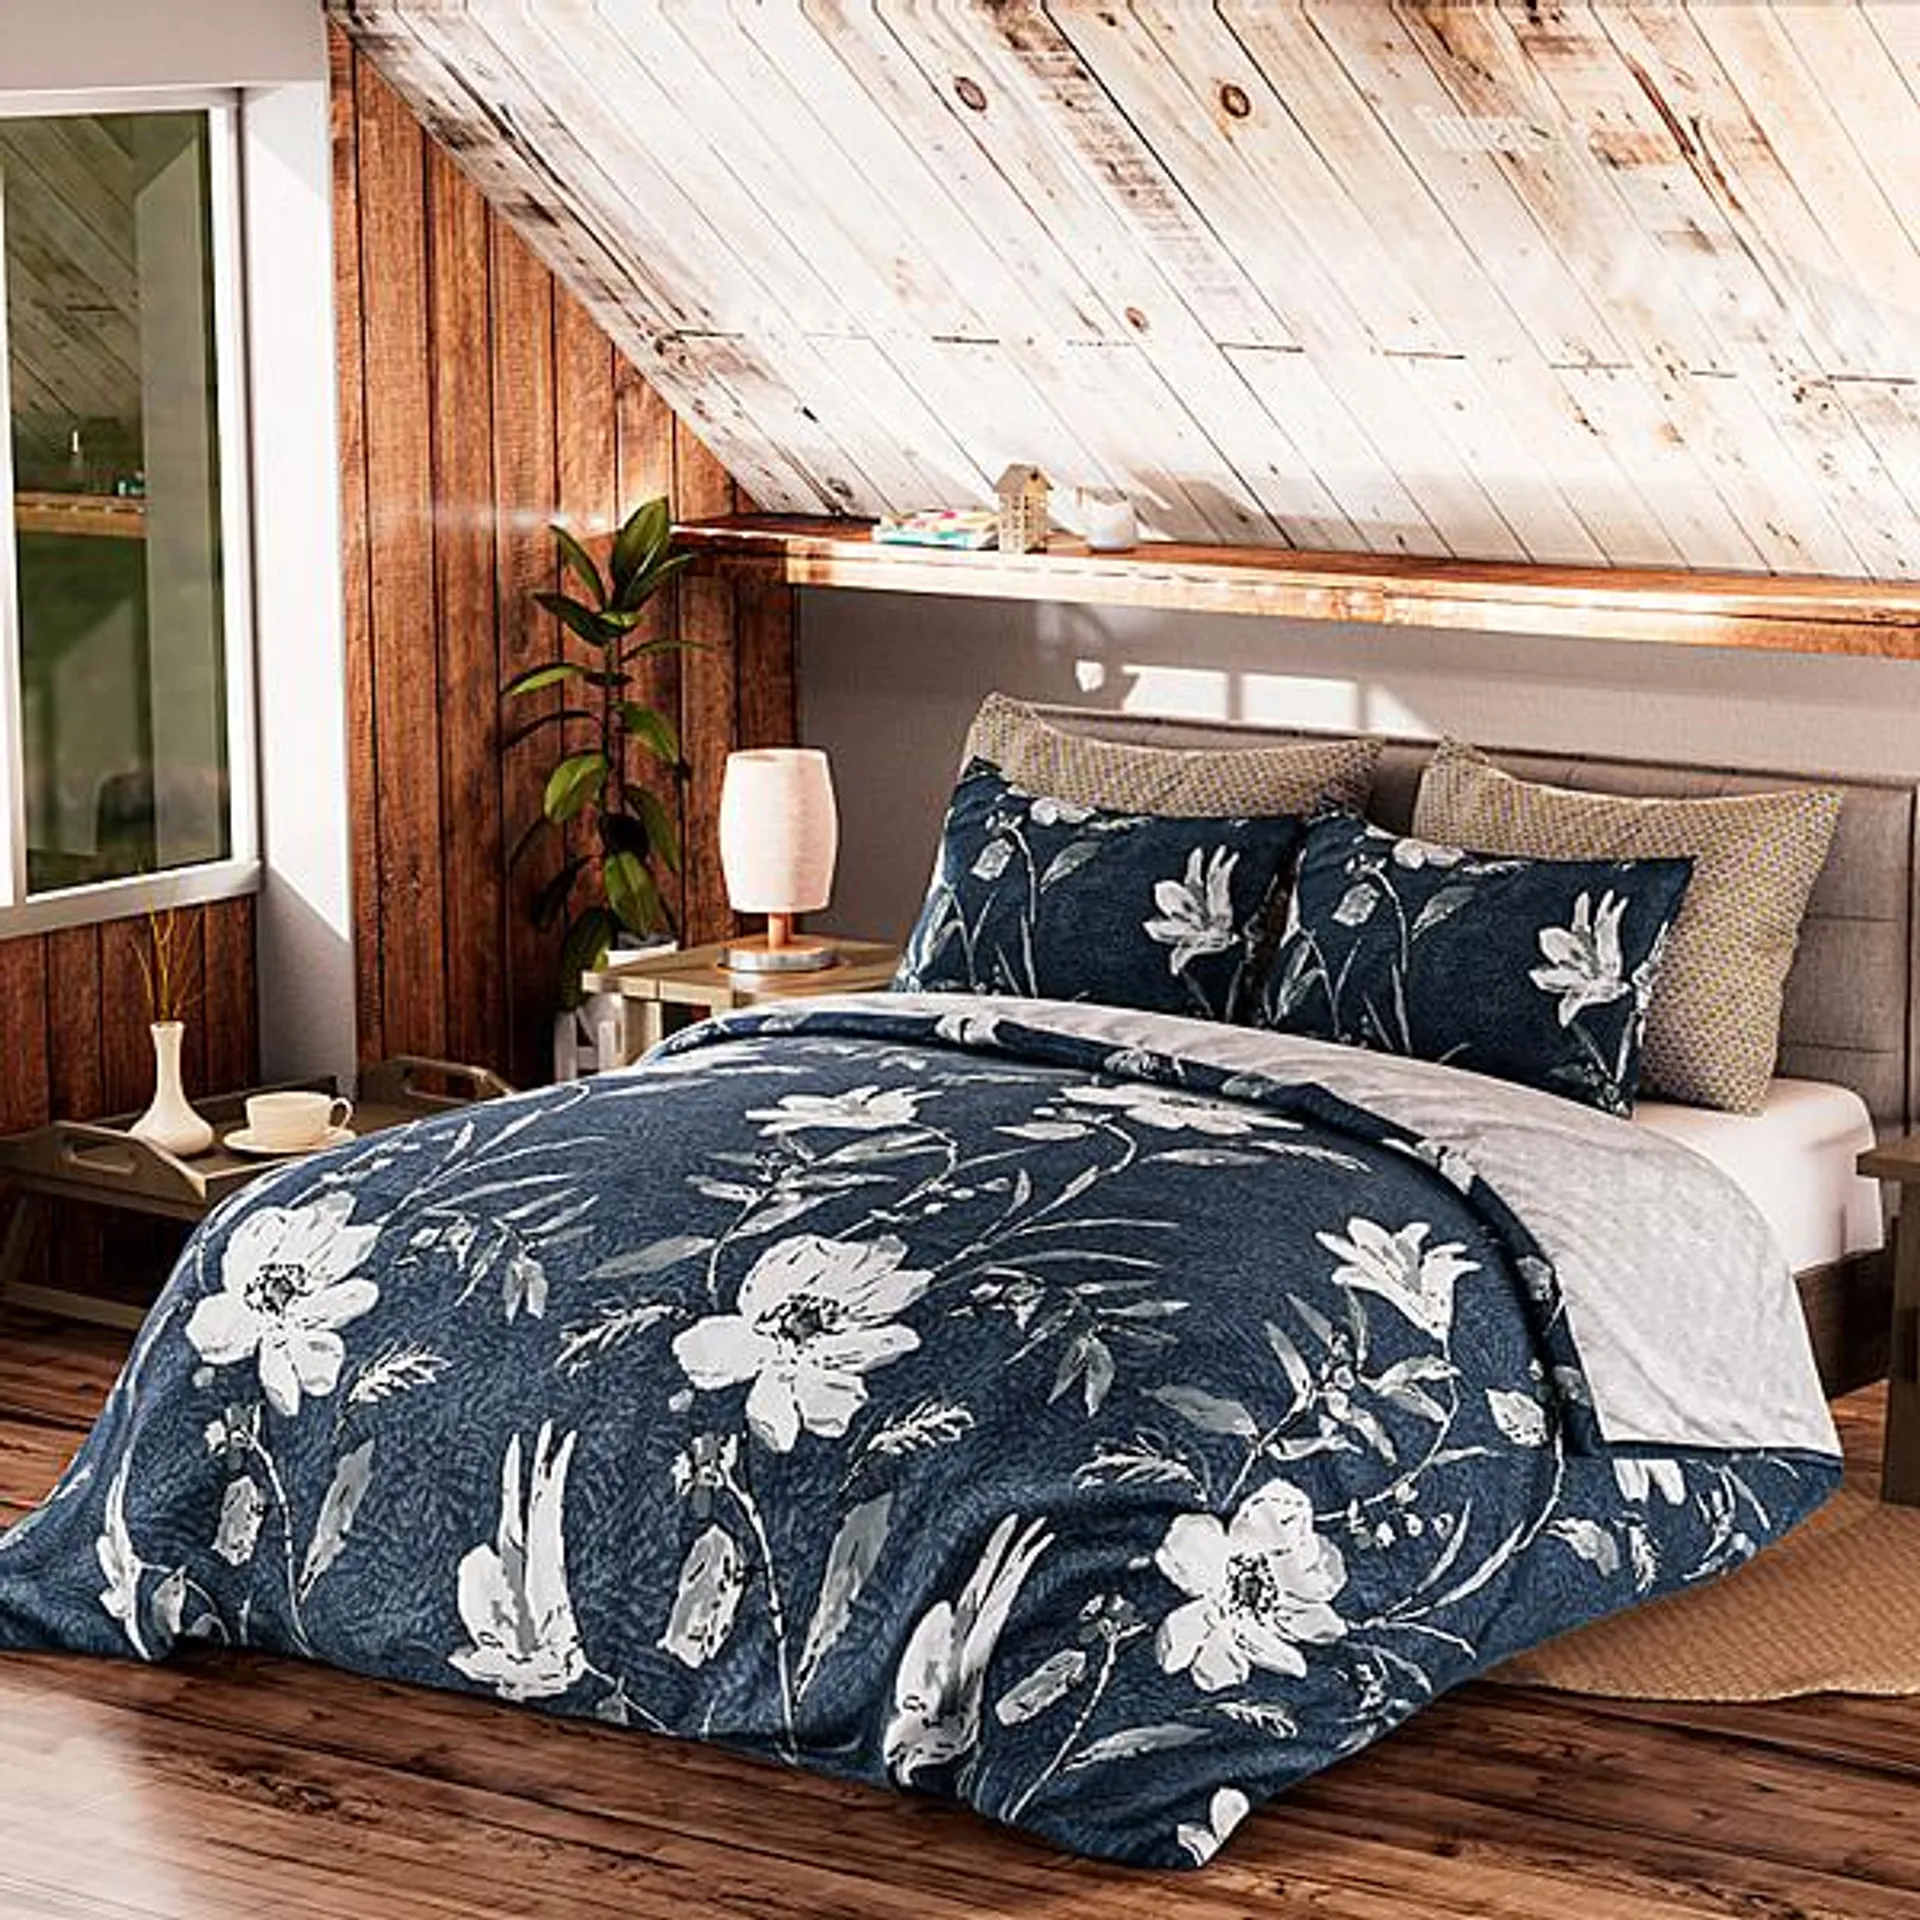 3 Piece Set - Printed Duvet Cover with 2 Pillow Cases - Grey